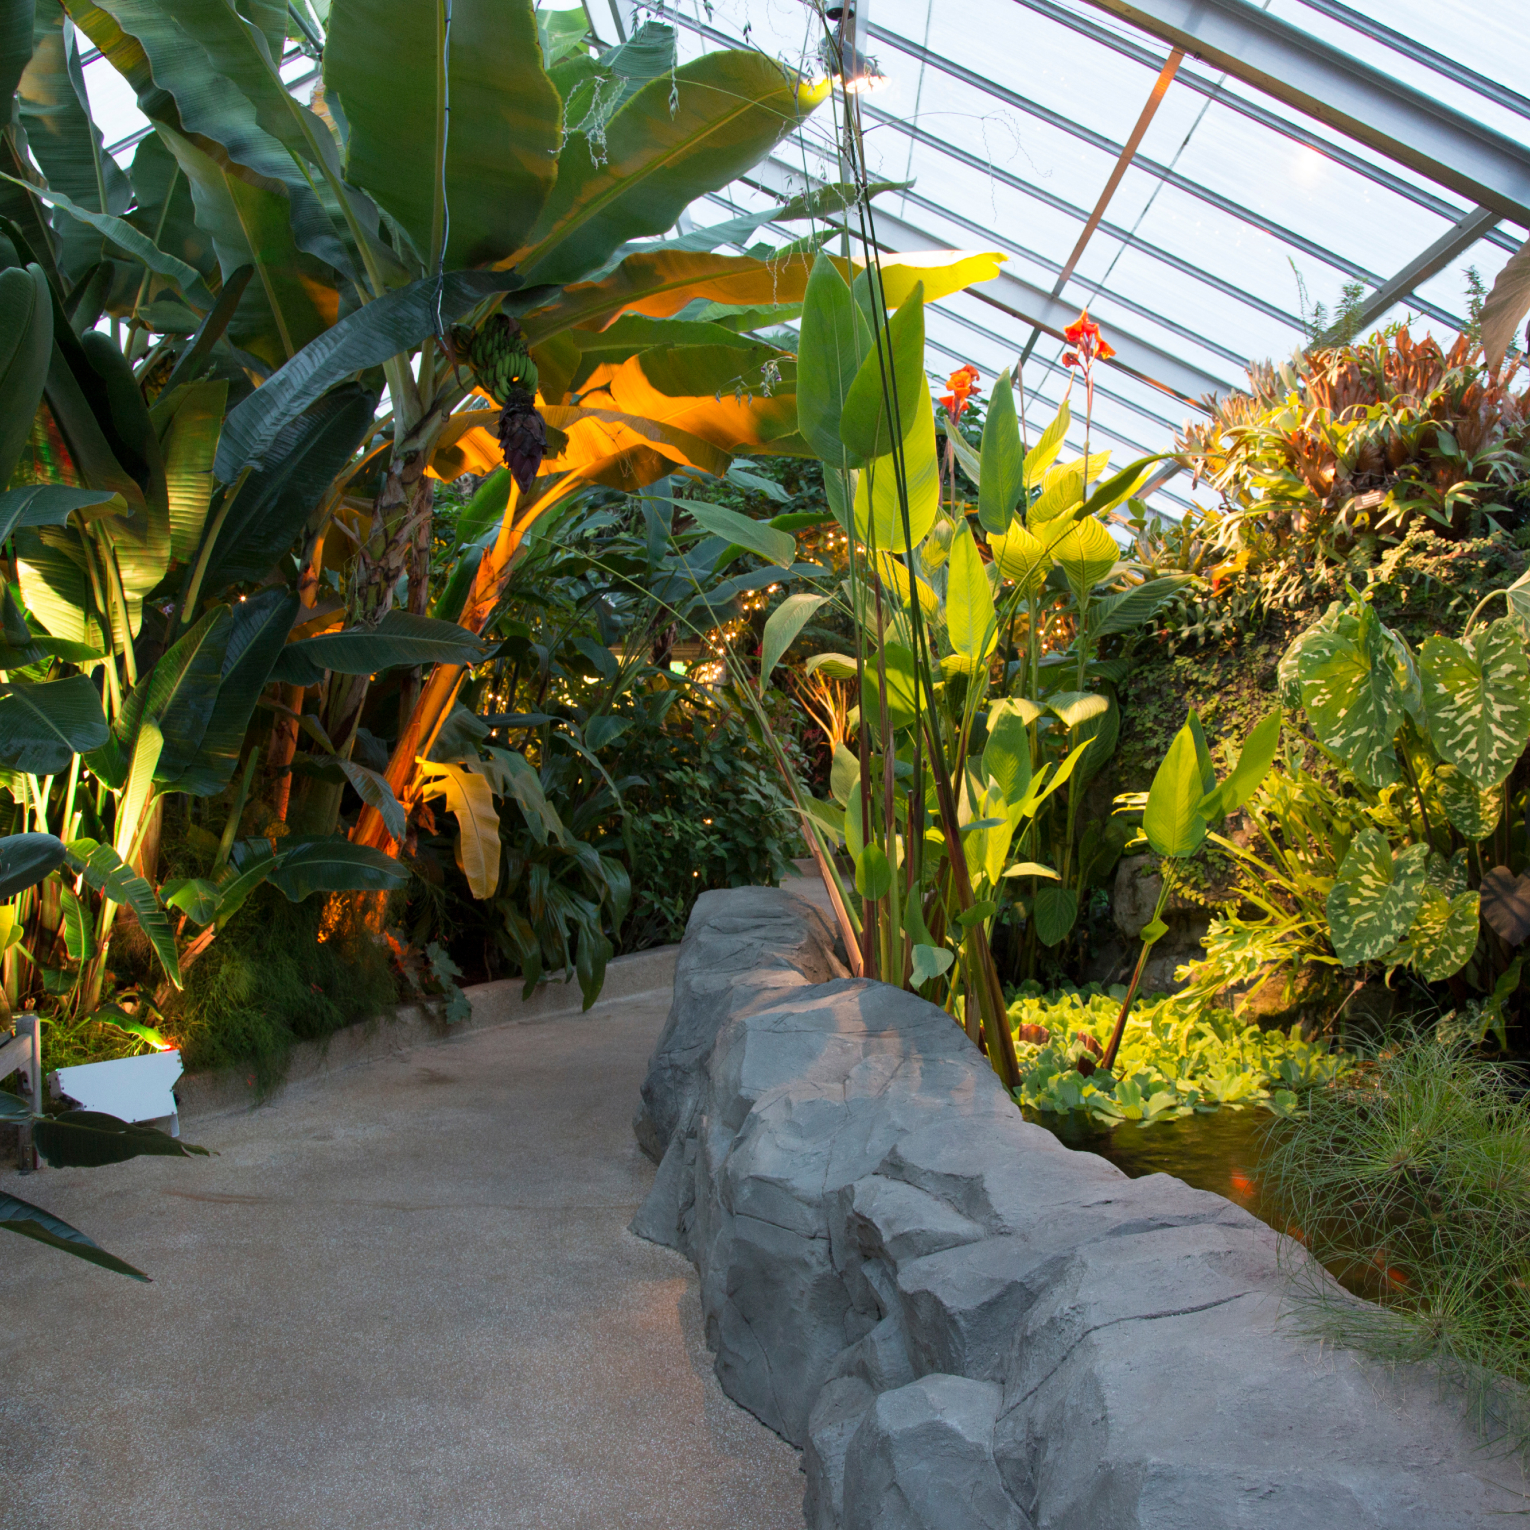 The Tropical House with plants lit from below making for a dramatic contrast of green and shadows